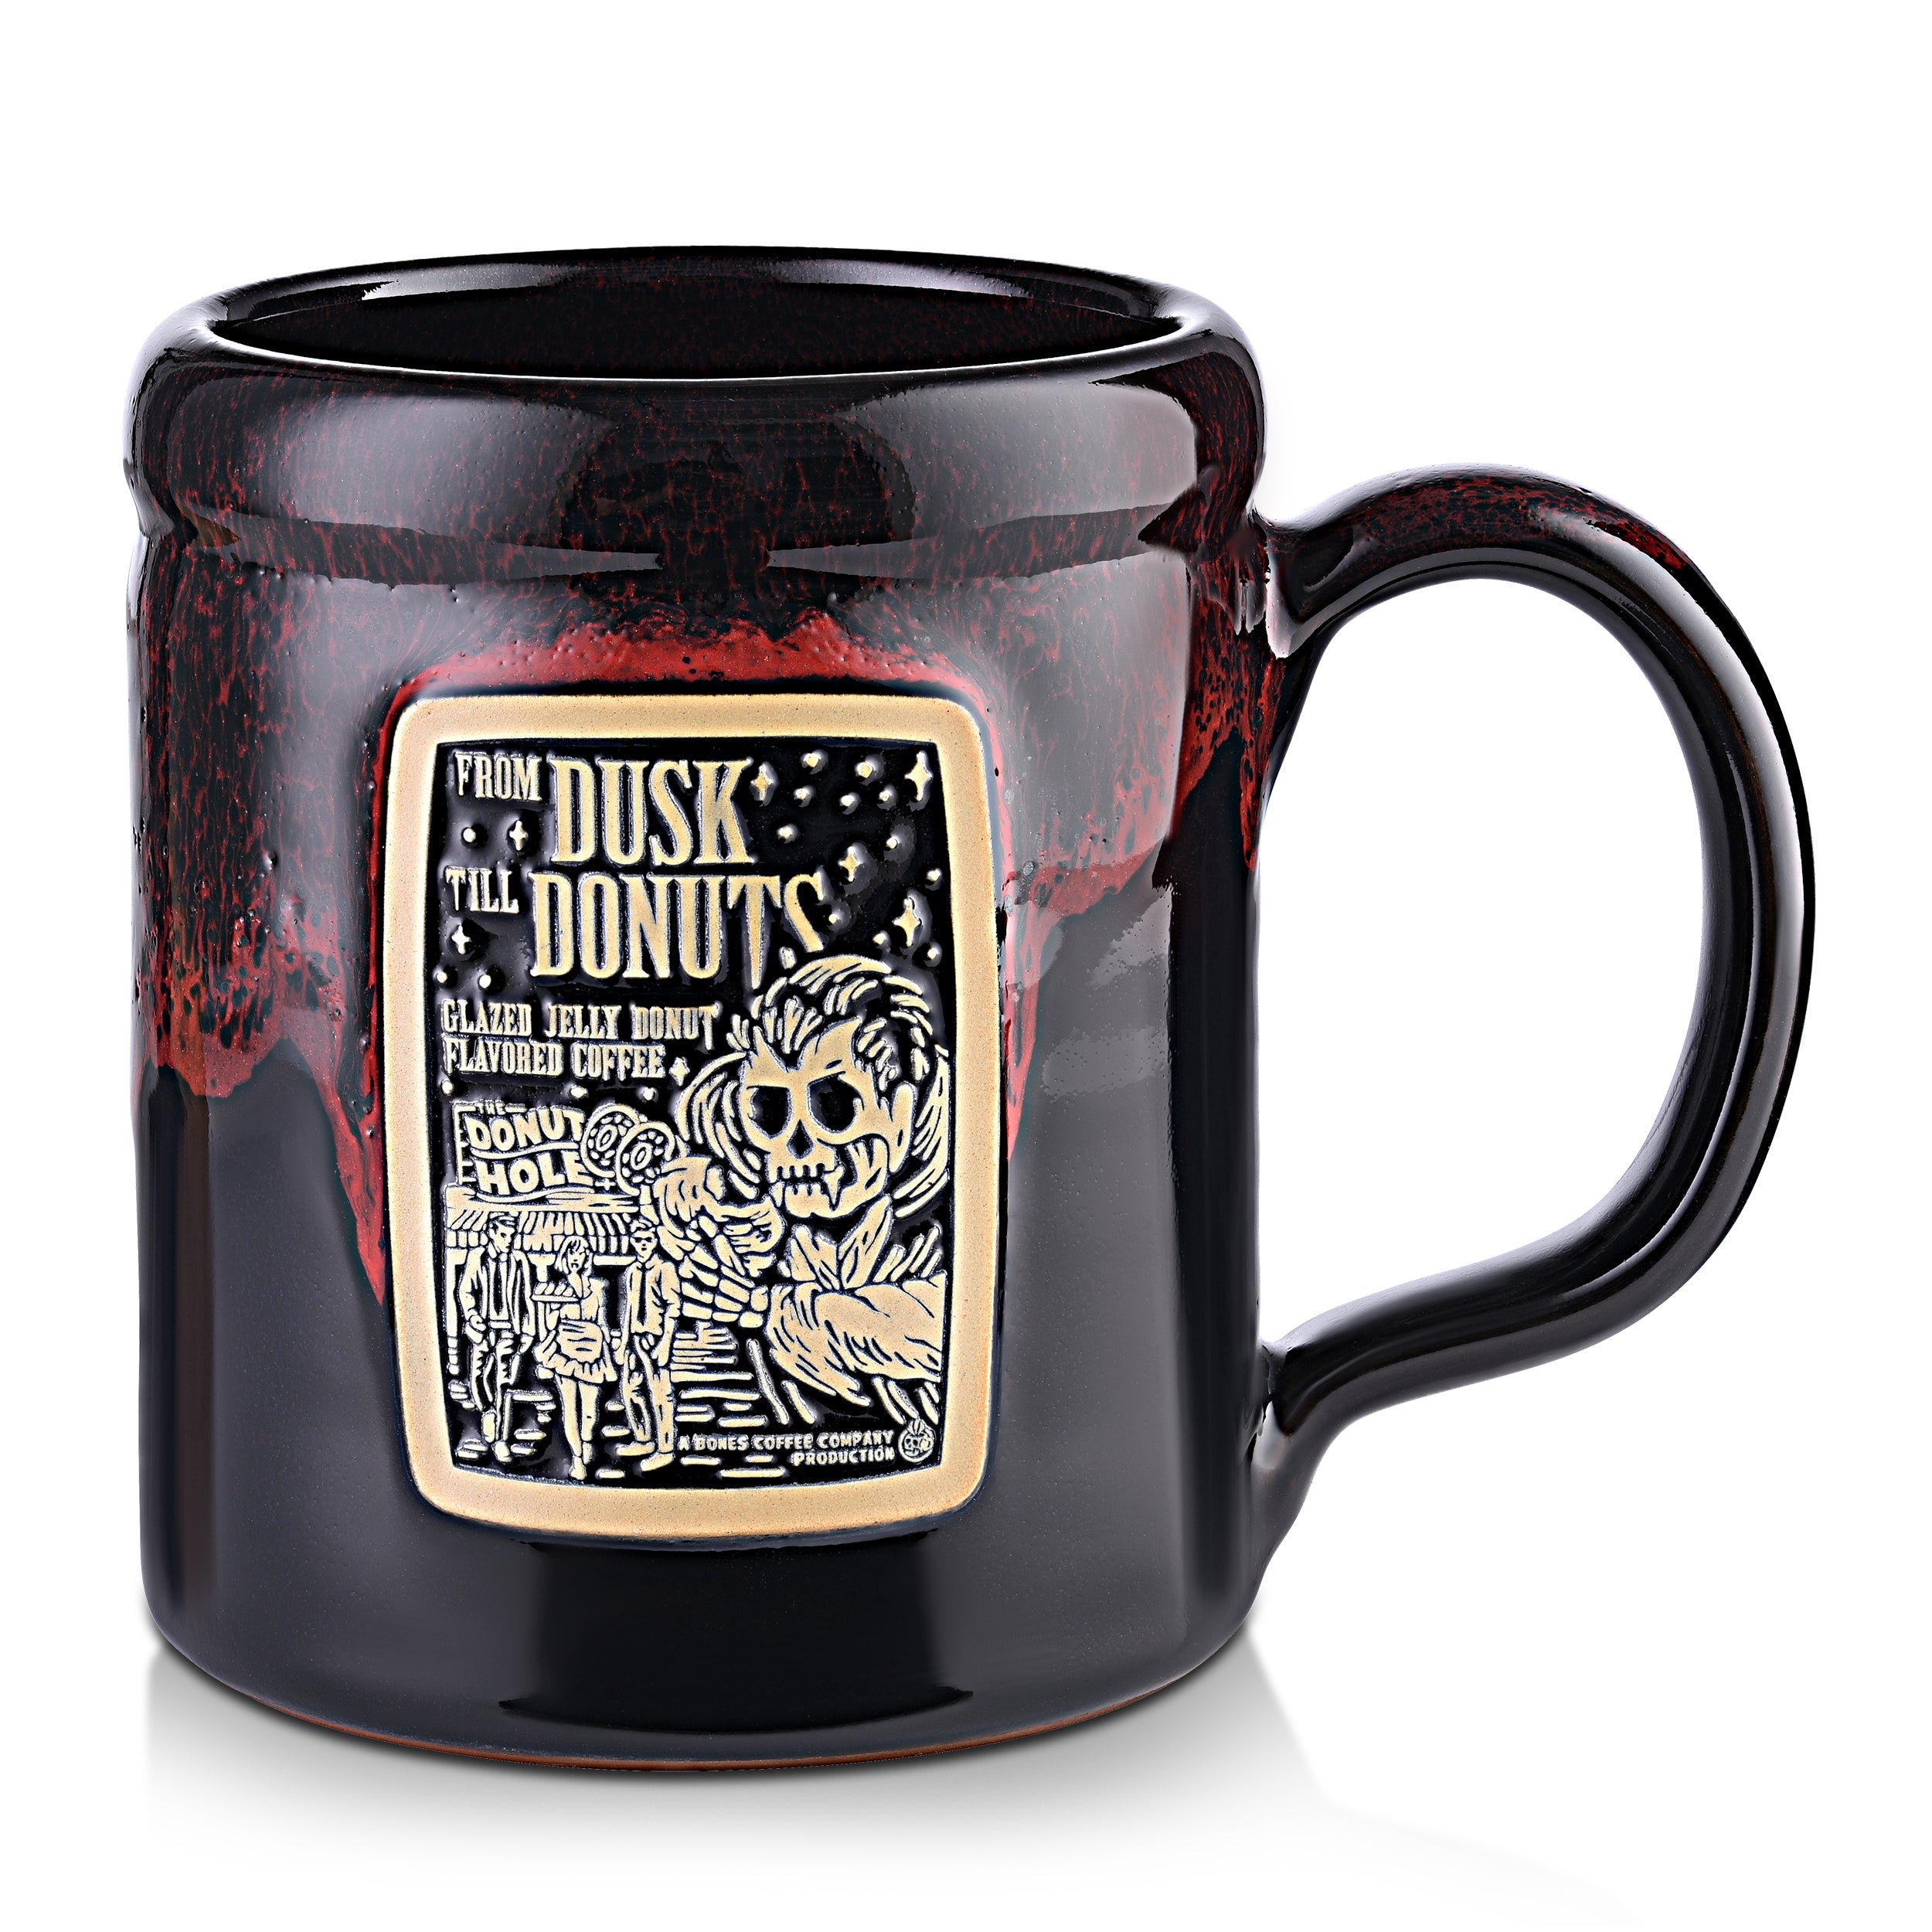 The front of the Bones Coffee Company From Dusk til Dawn hand thrown tankard with the From Dusk til Dawn coffee art on the golden medallion. The mug is black colored with a red glaze on top.